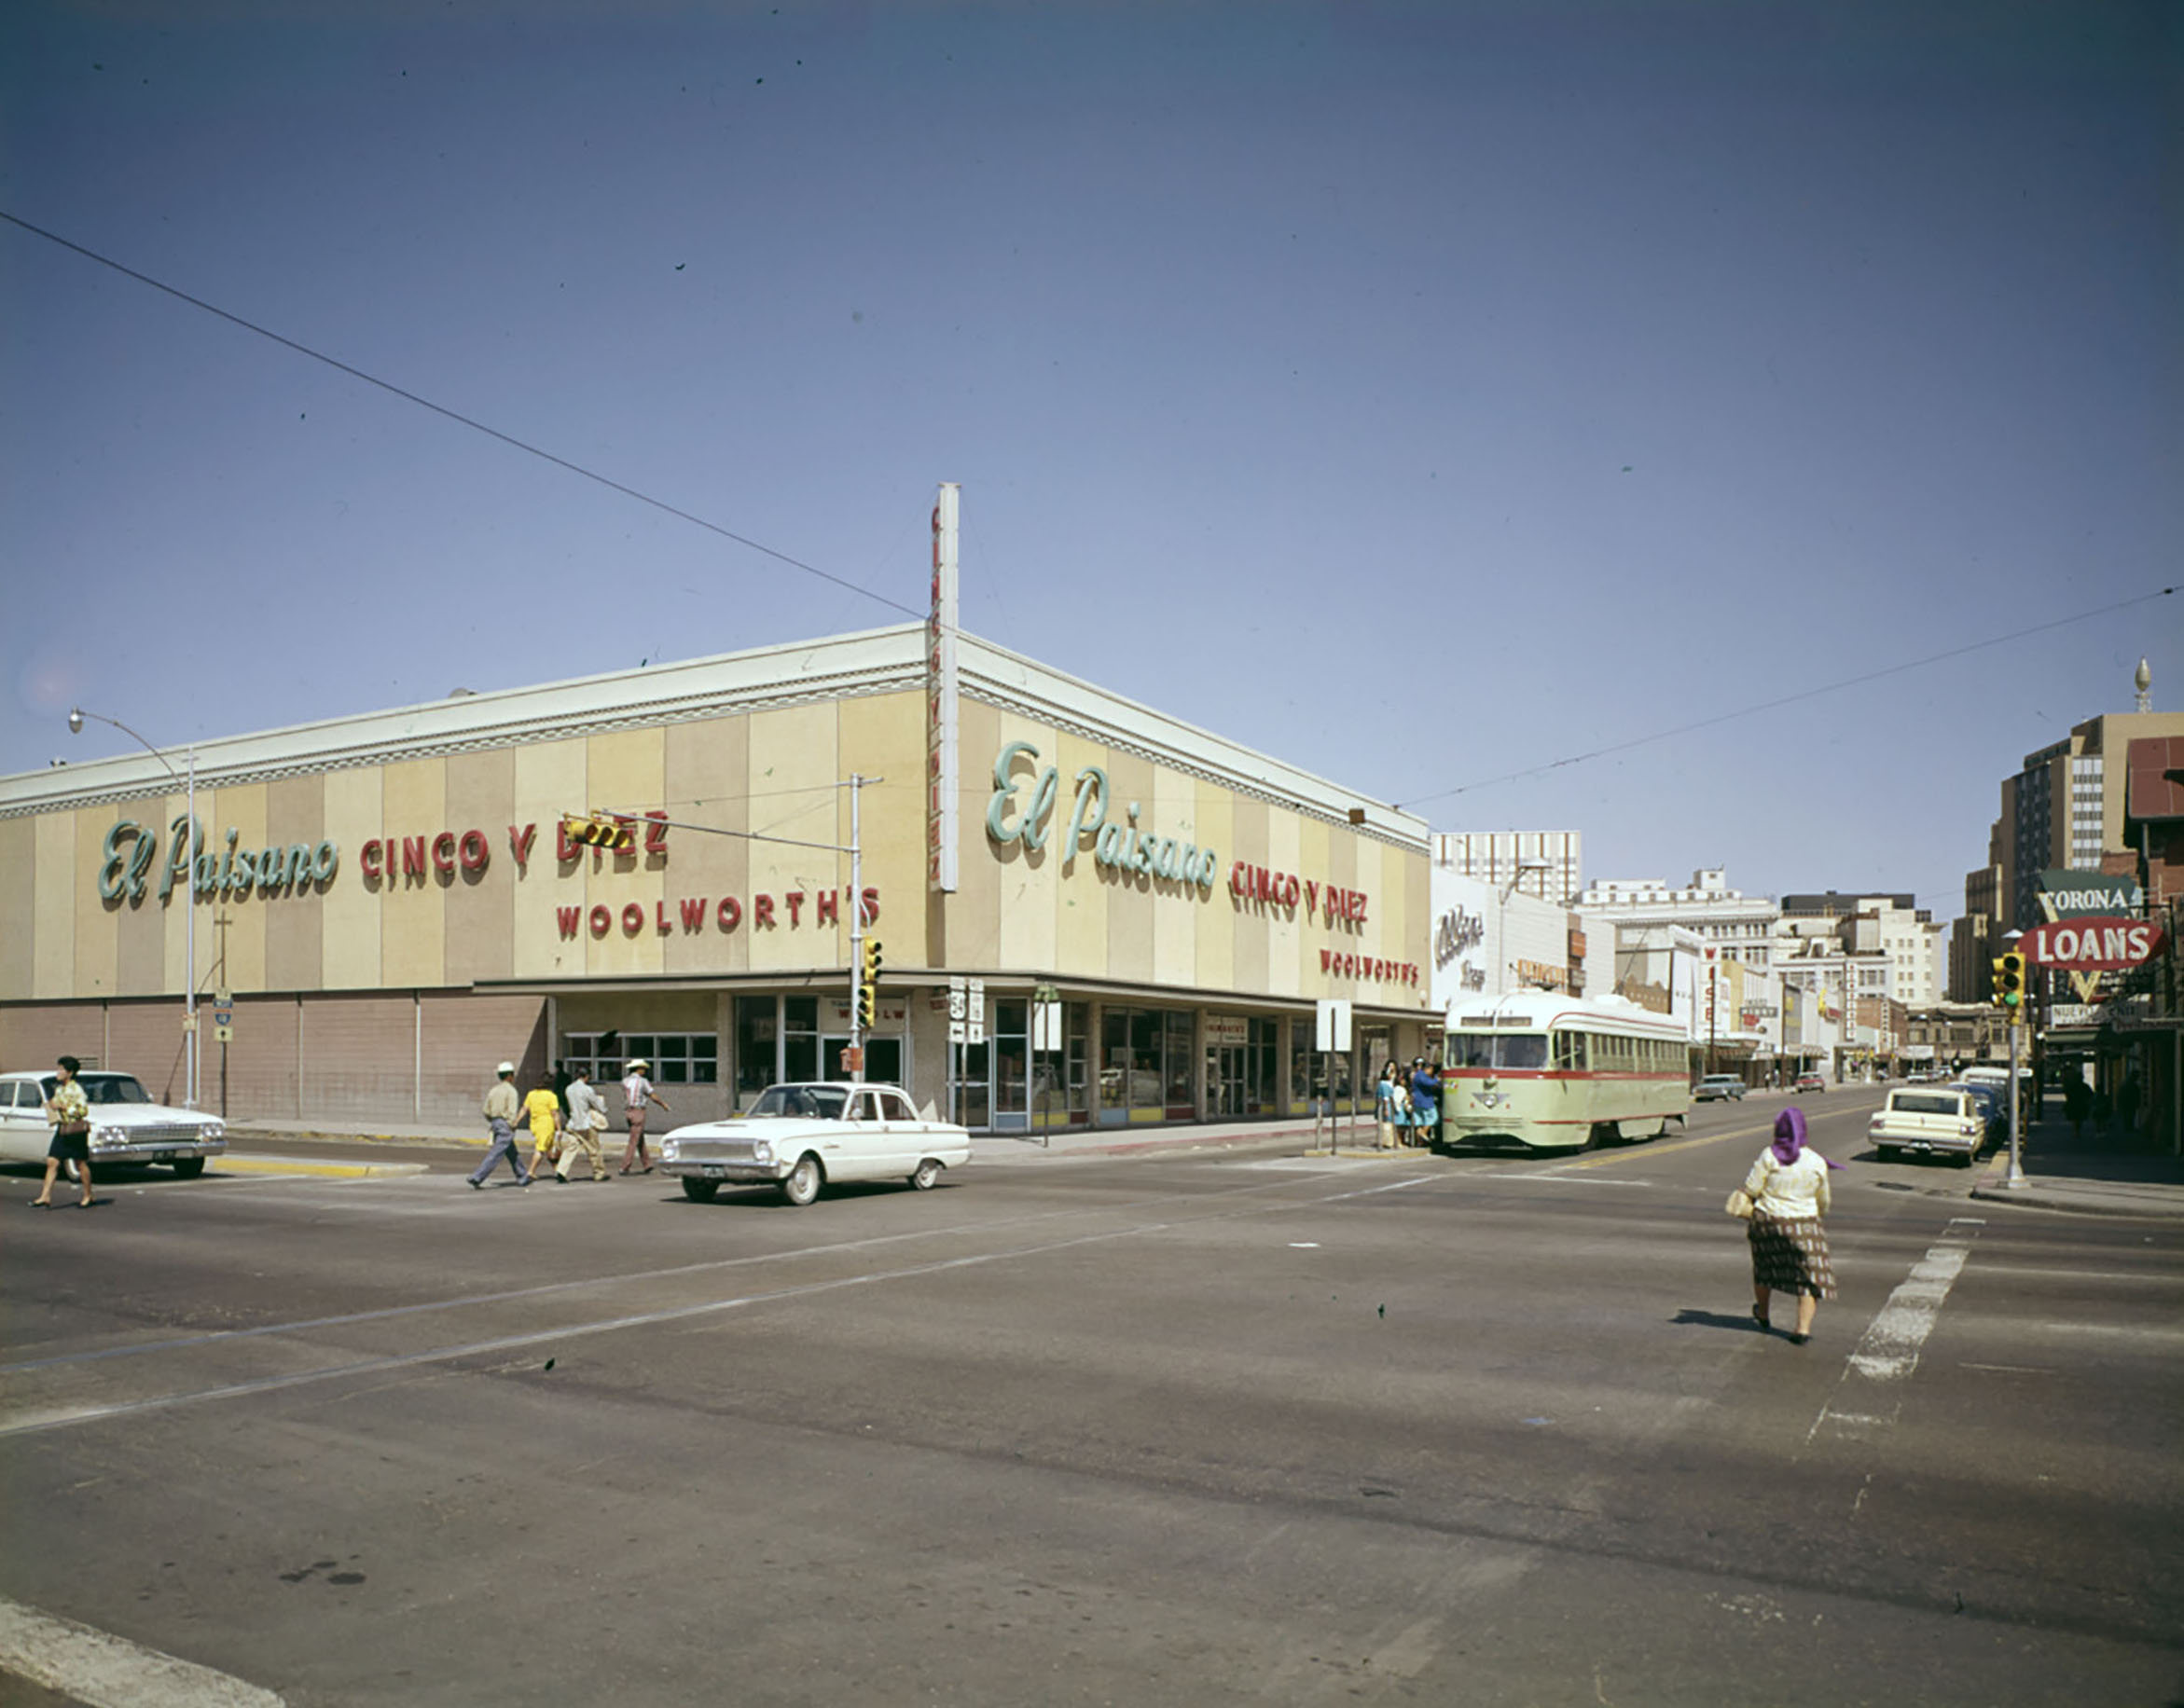 A view of a large store on a city street. A streetcar and pedestrian pass by large 1960s automobiles